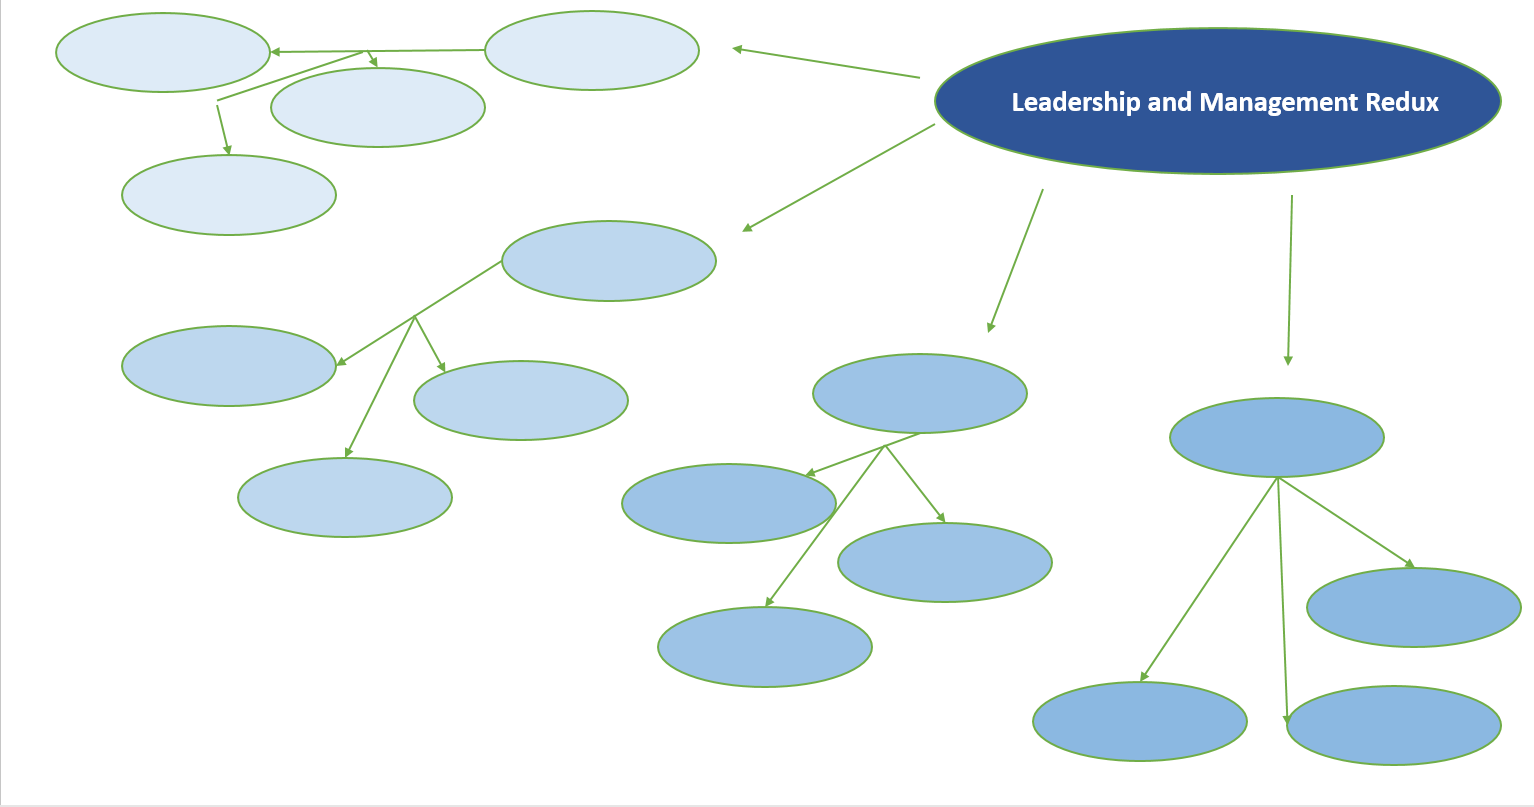 Template for leadership and management redux concept map